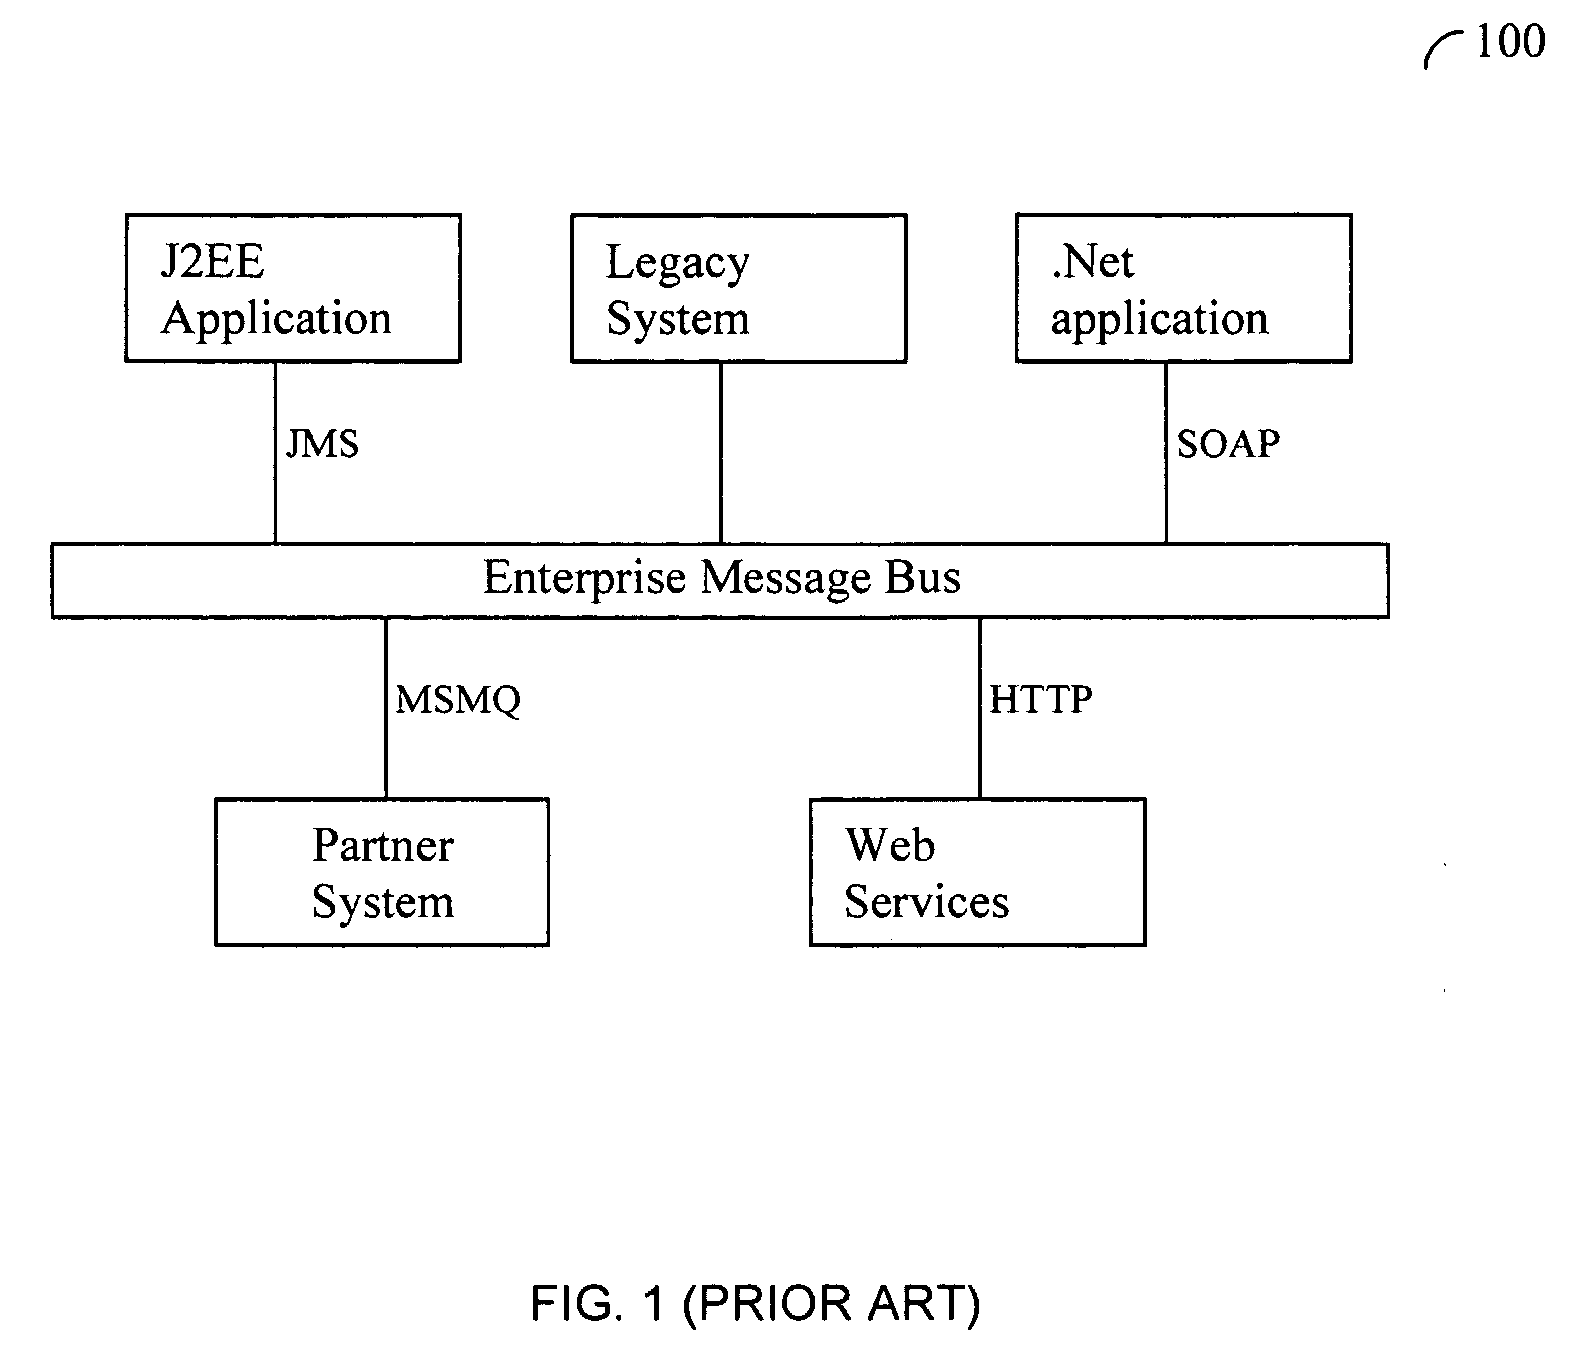 Method and apparatus for automatically discovering of application errors as a predictive metric for the functional health of enterprise applications